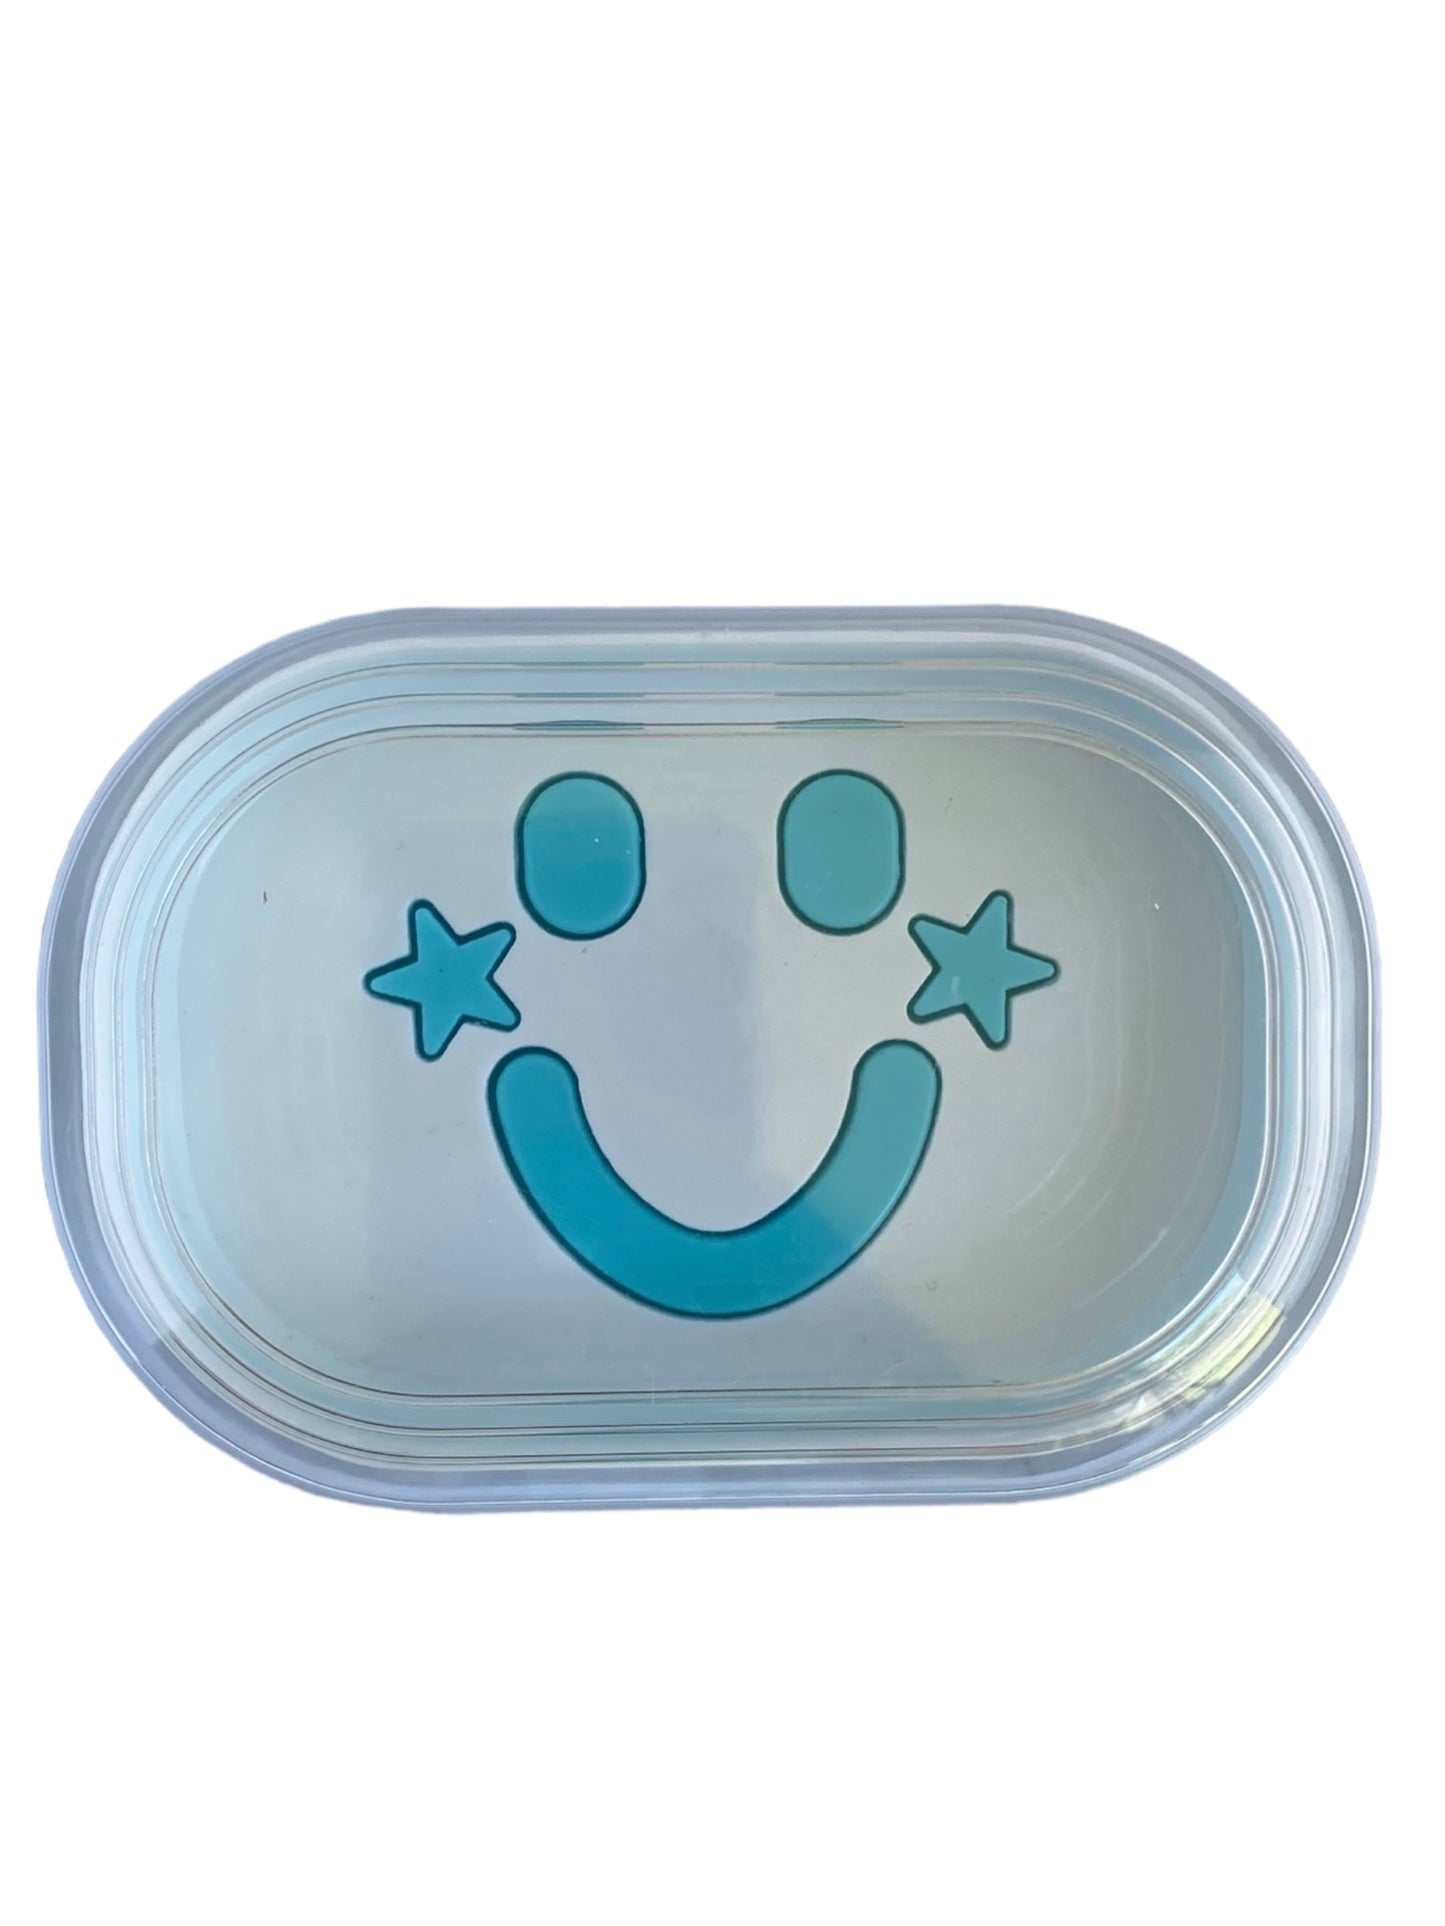 Smiley Face Soap Dish with Starry Delights